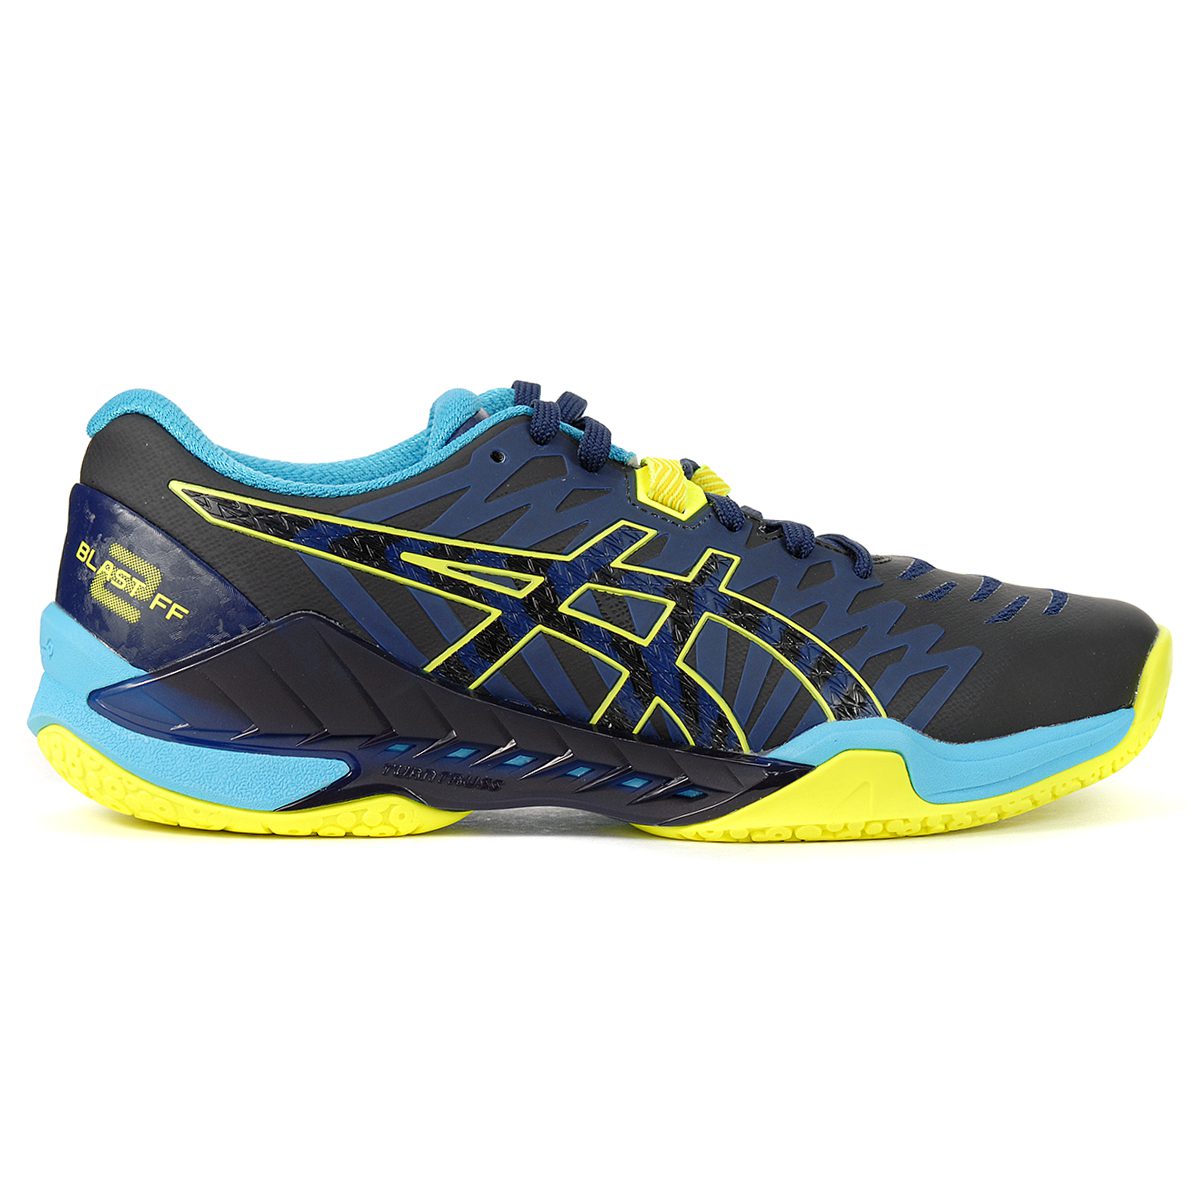 ASICS Men's Blast FF 2 Black/Safety Yellow Court shoes 1071A044.400 NEW ...